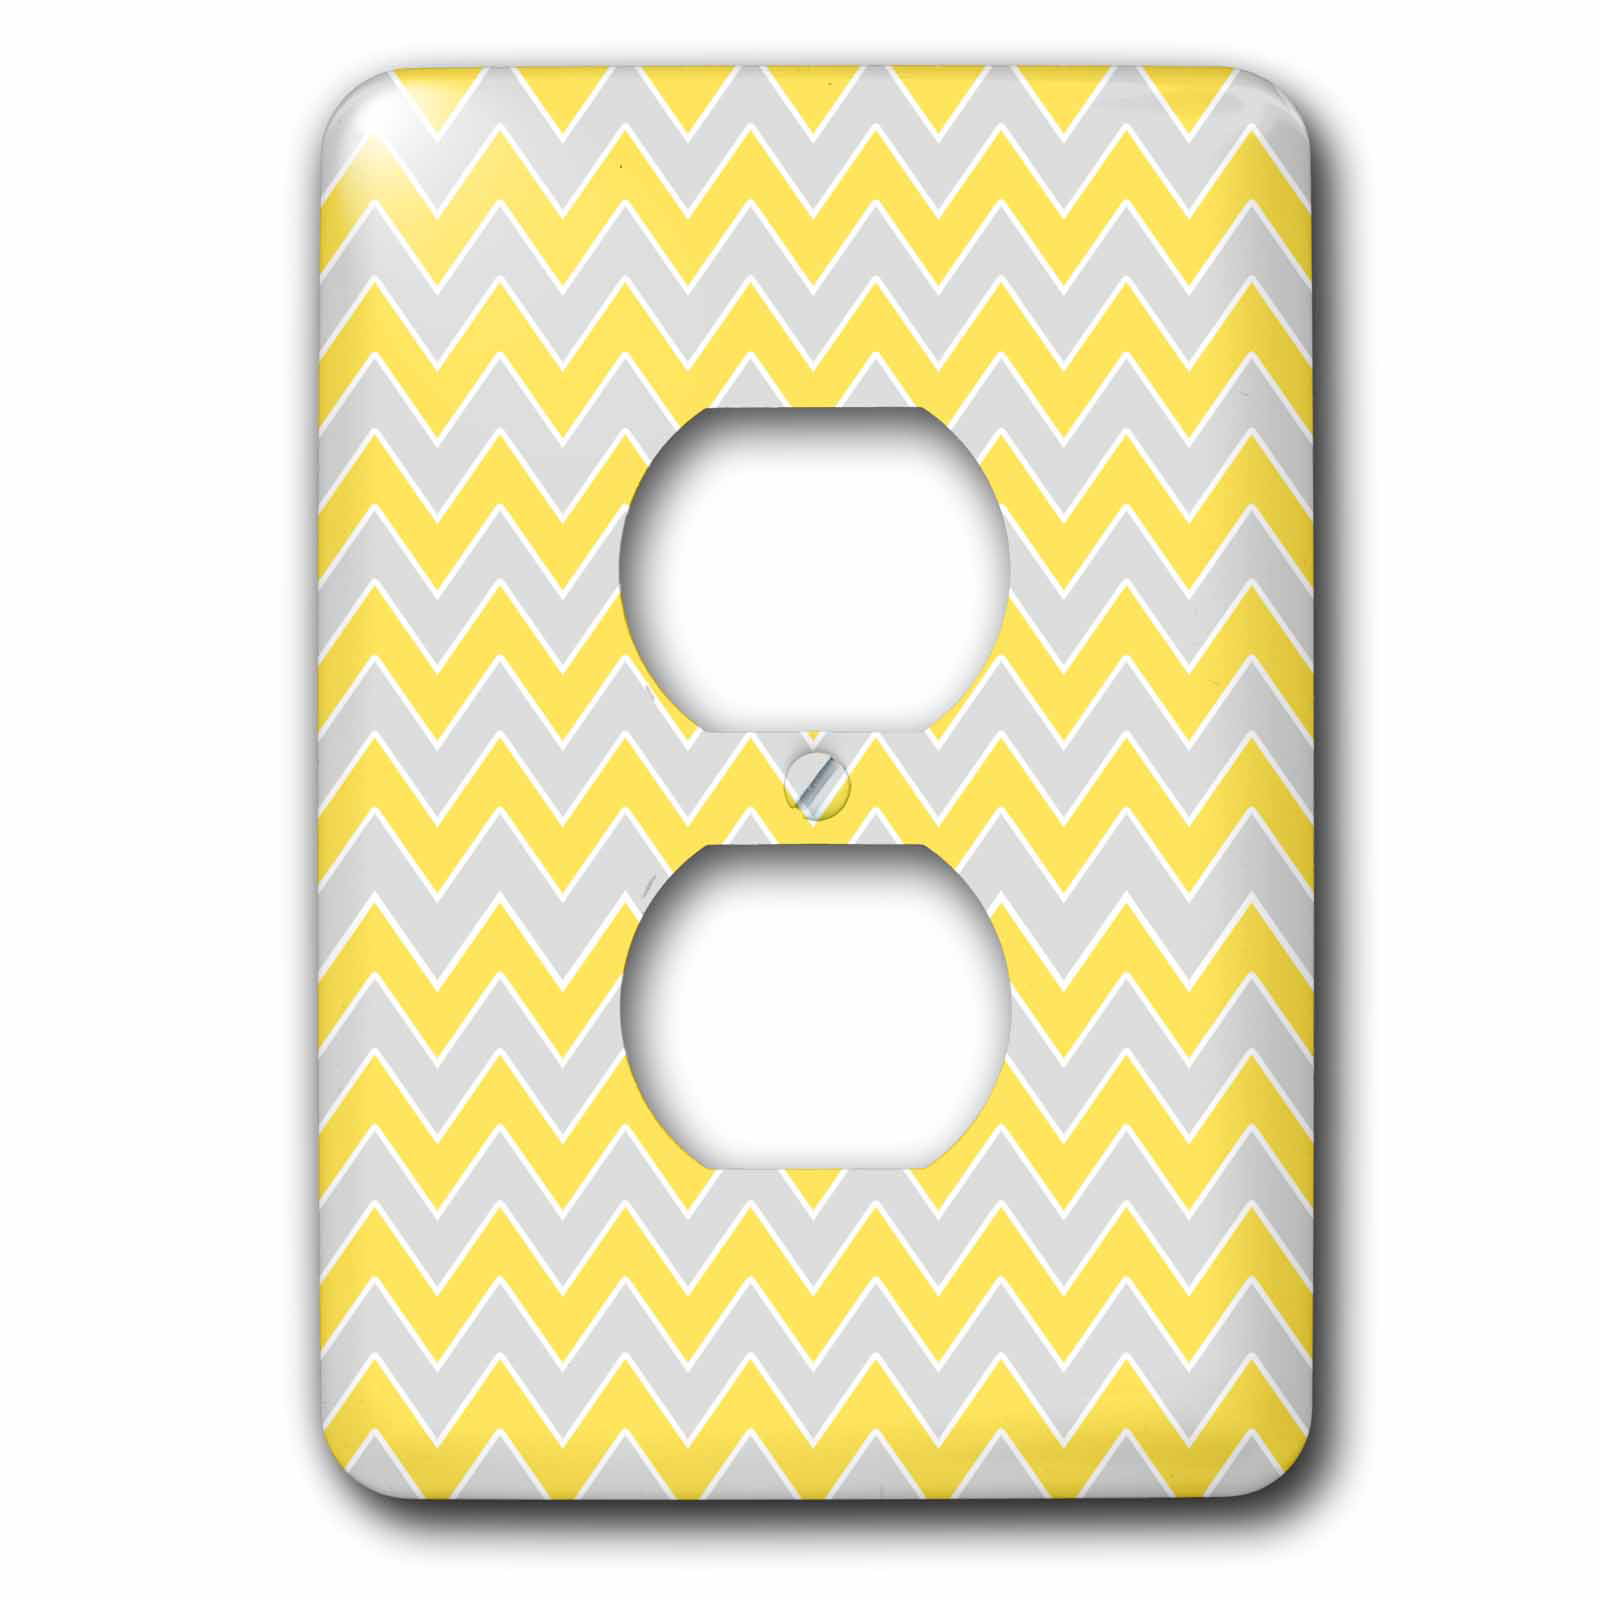 Light Cover Single Wall 1-Gang Device Receptacle Yellow Pattern Design Chevron